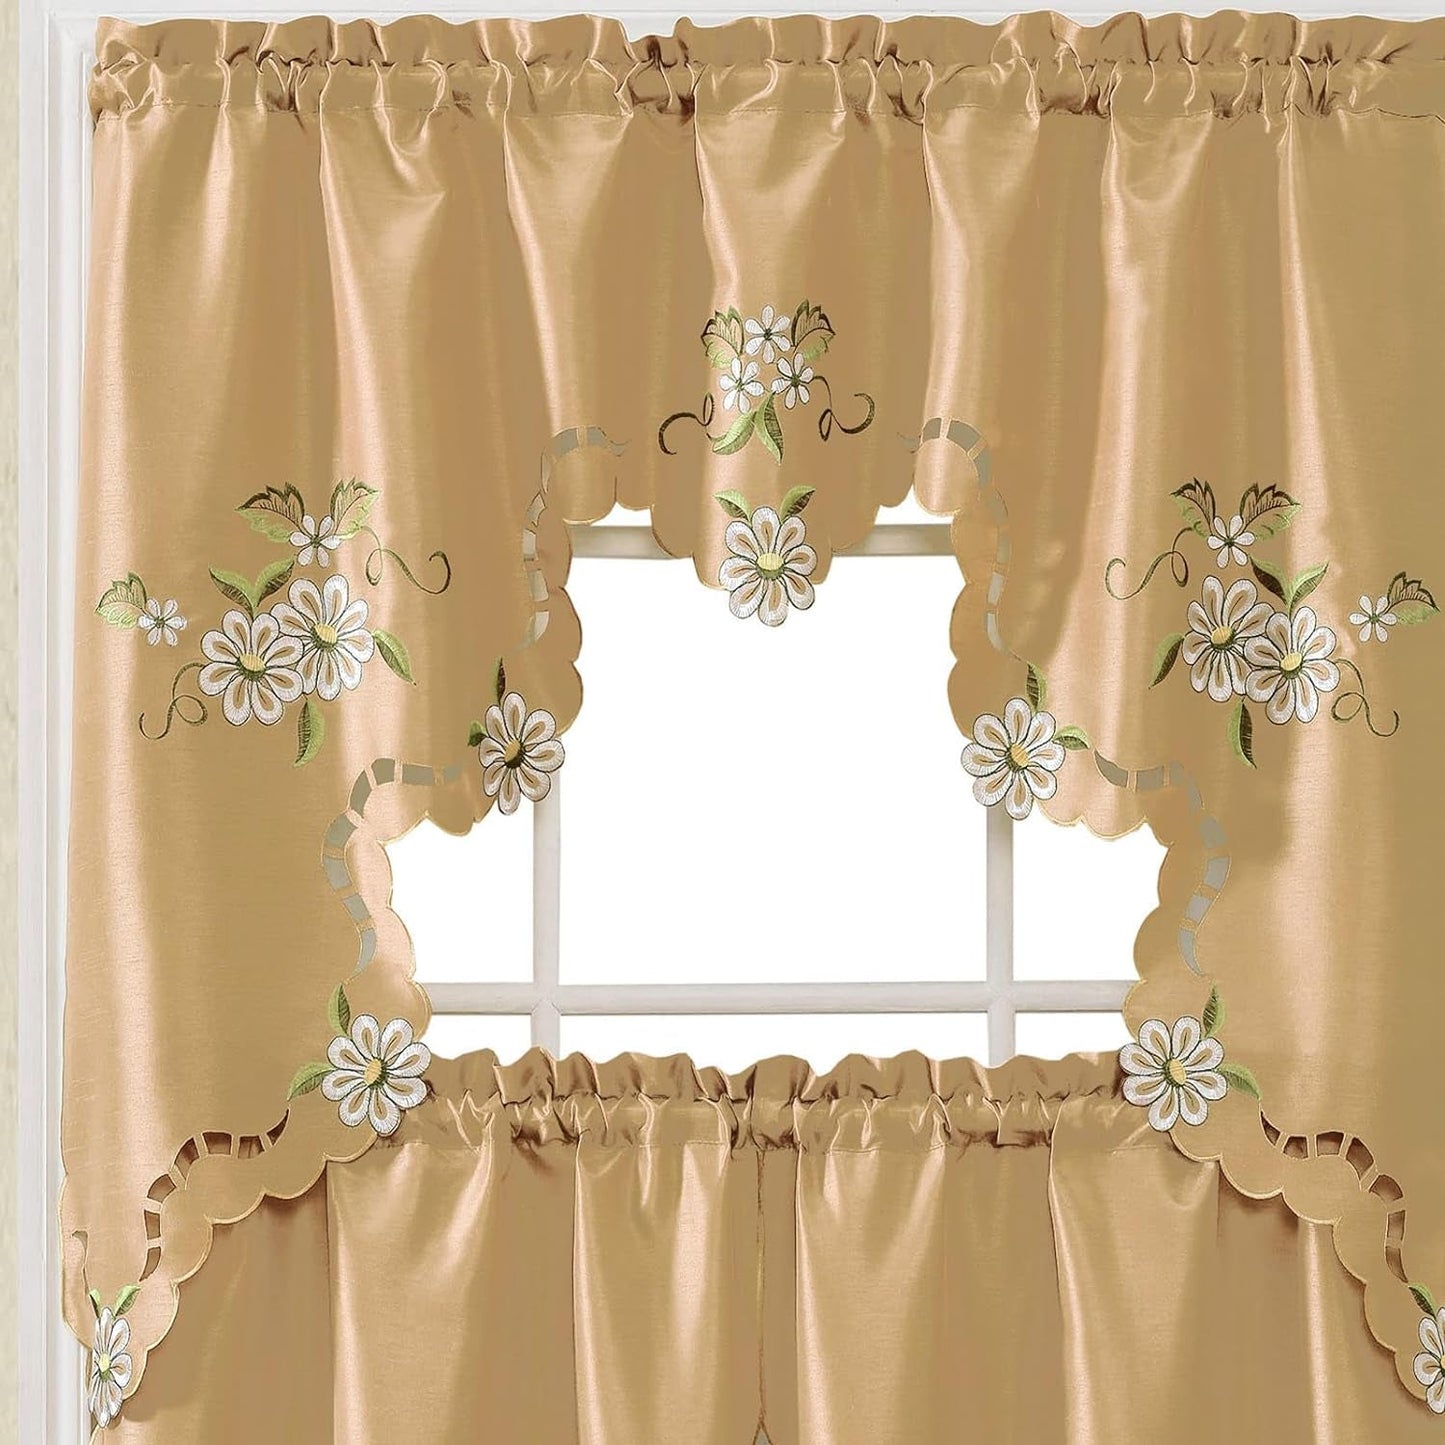 GOHD Cutwork Floral. Kitchen Curtain Set. Swag Valance and Tier Set. Nice Embroidery on Faux Silk Fabric with Cutworks. (Grey)